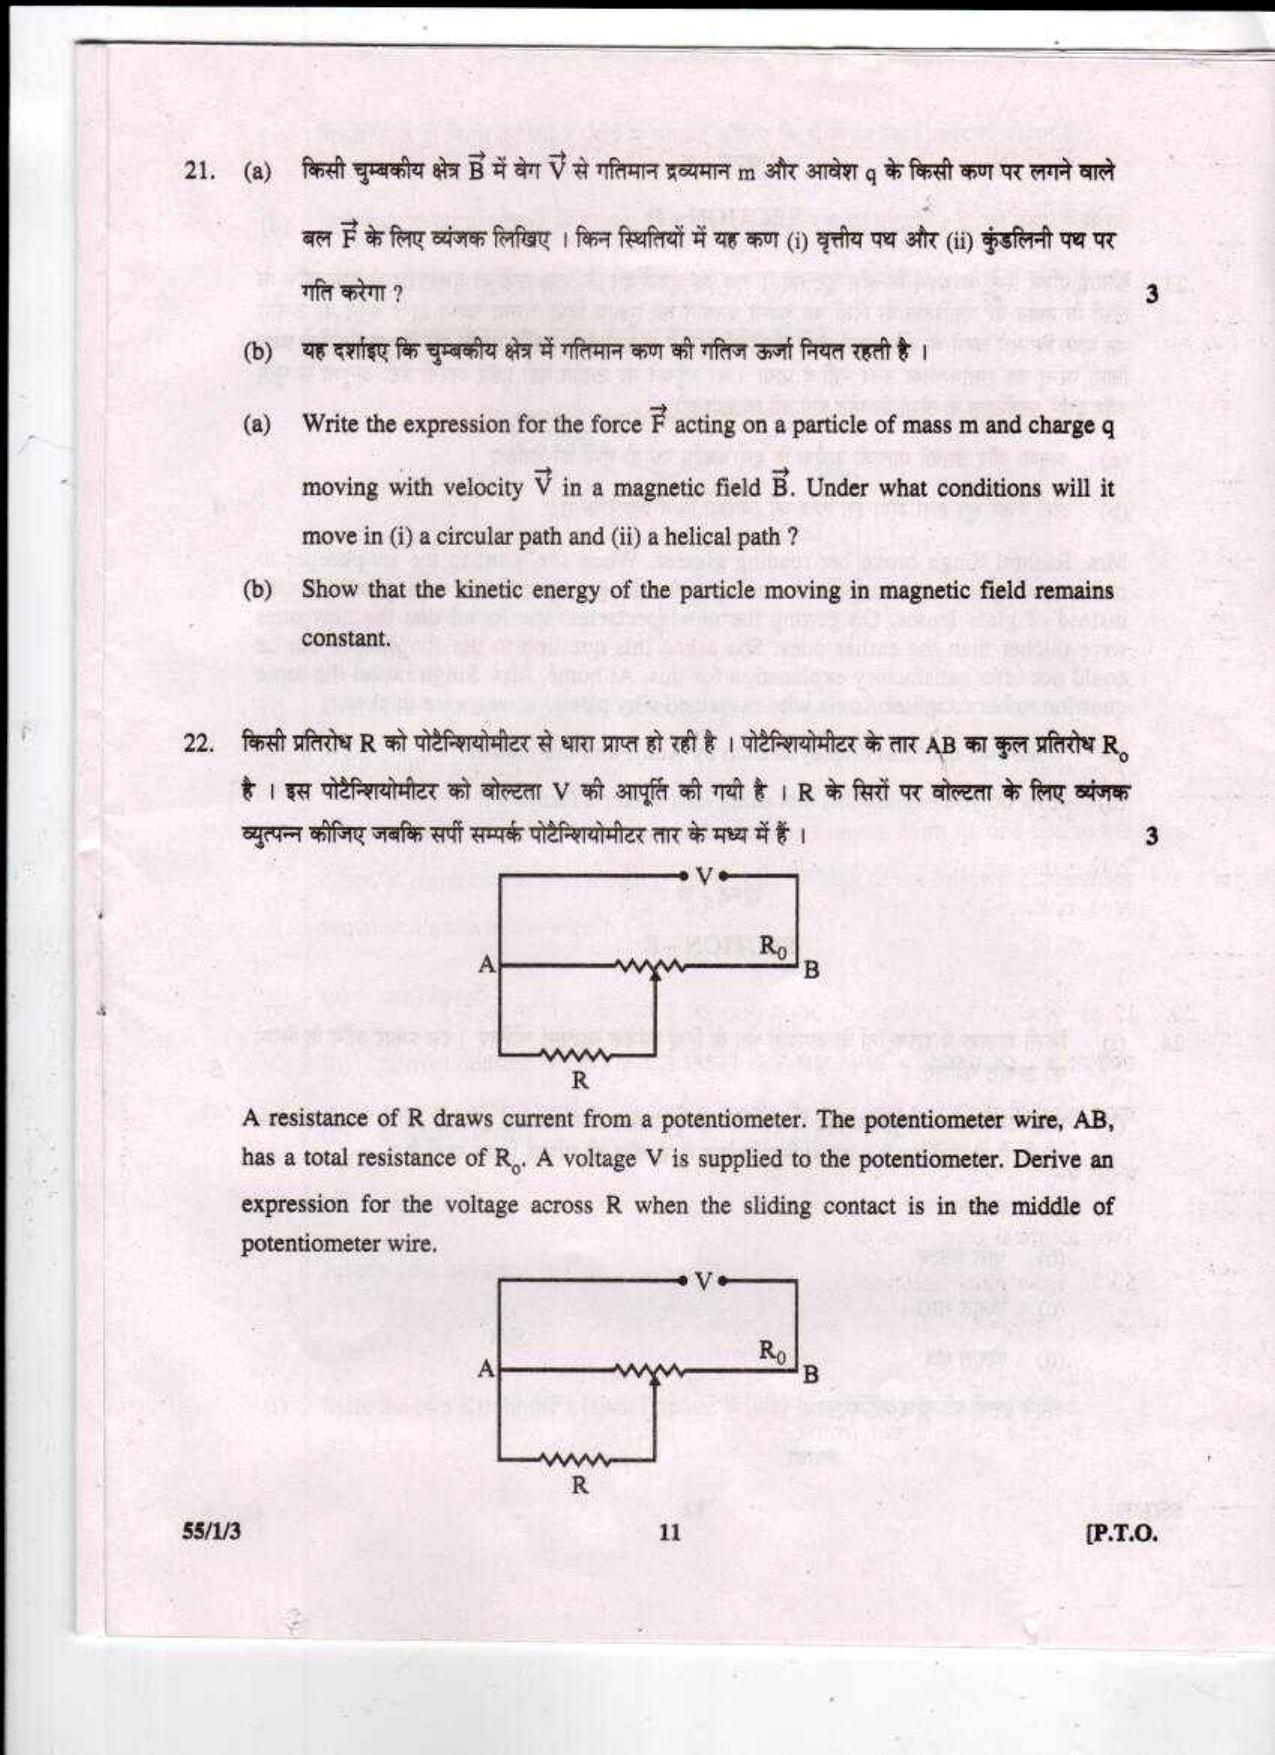 CBSE Class 12 Physics (Theory) SET 3-Delhi-12 2017 Question Paper - Page 11